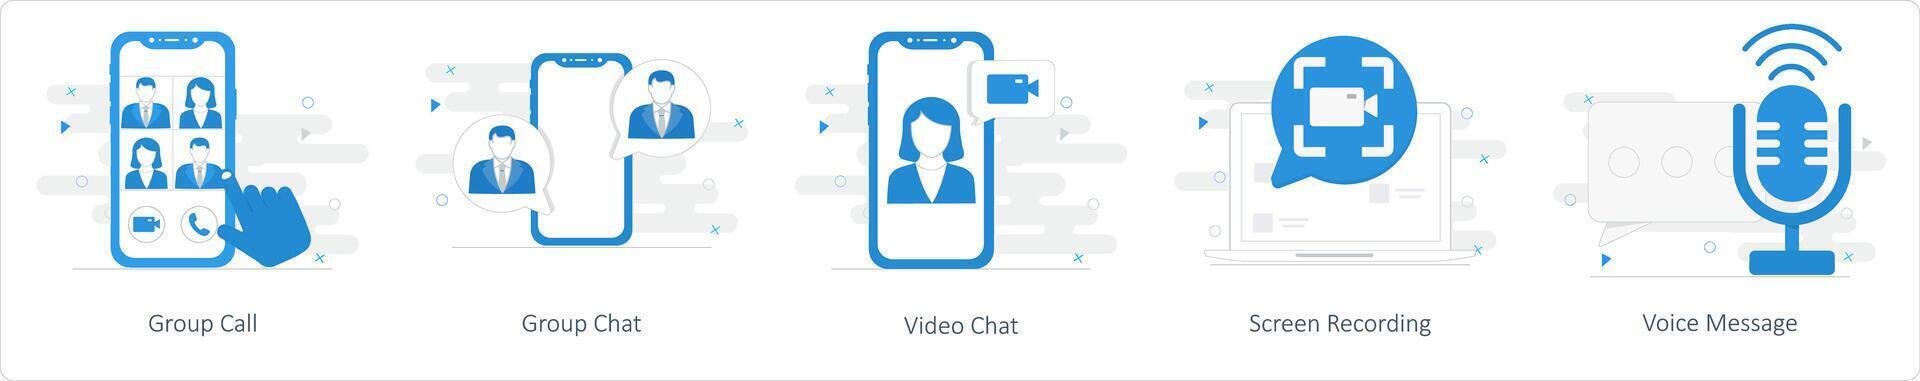 A set of 5 Mix icons as group call, group chat, video chat vector